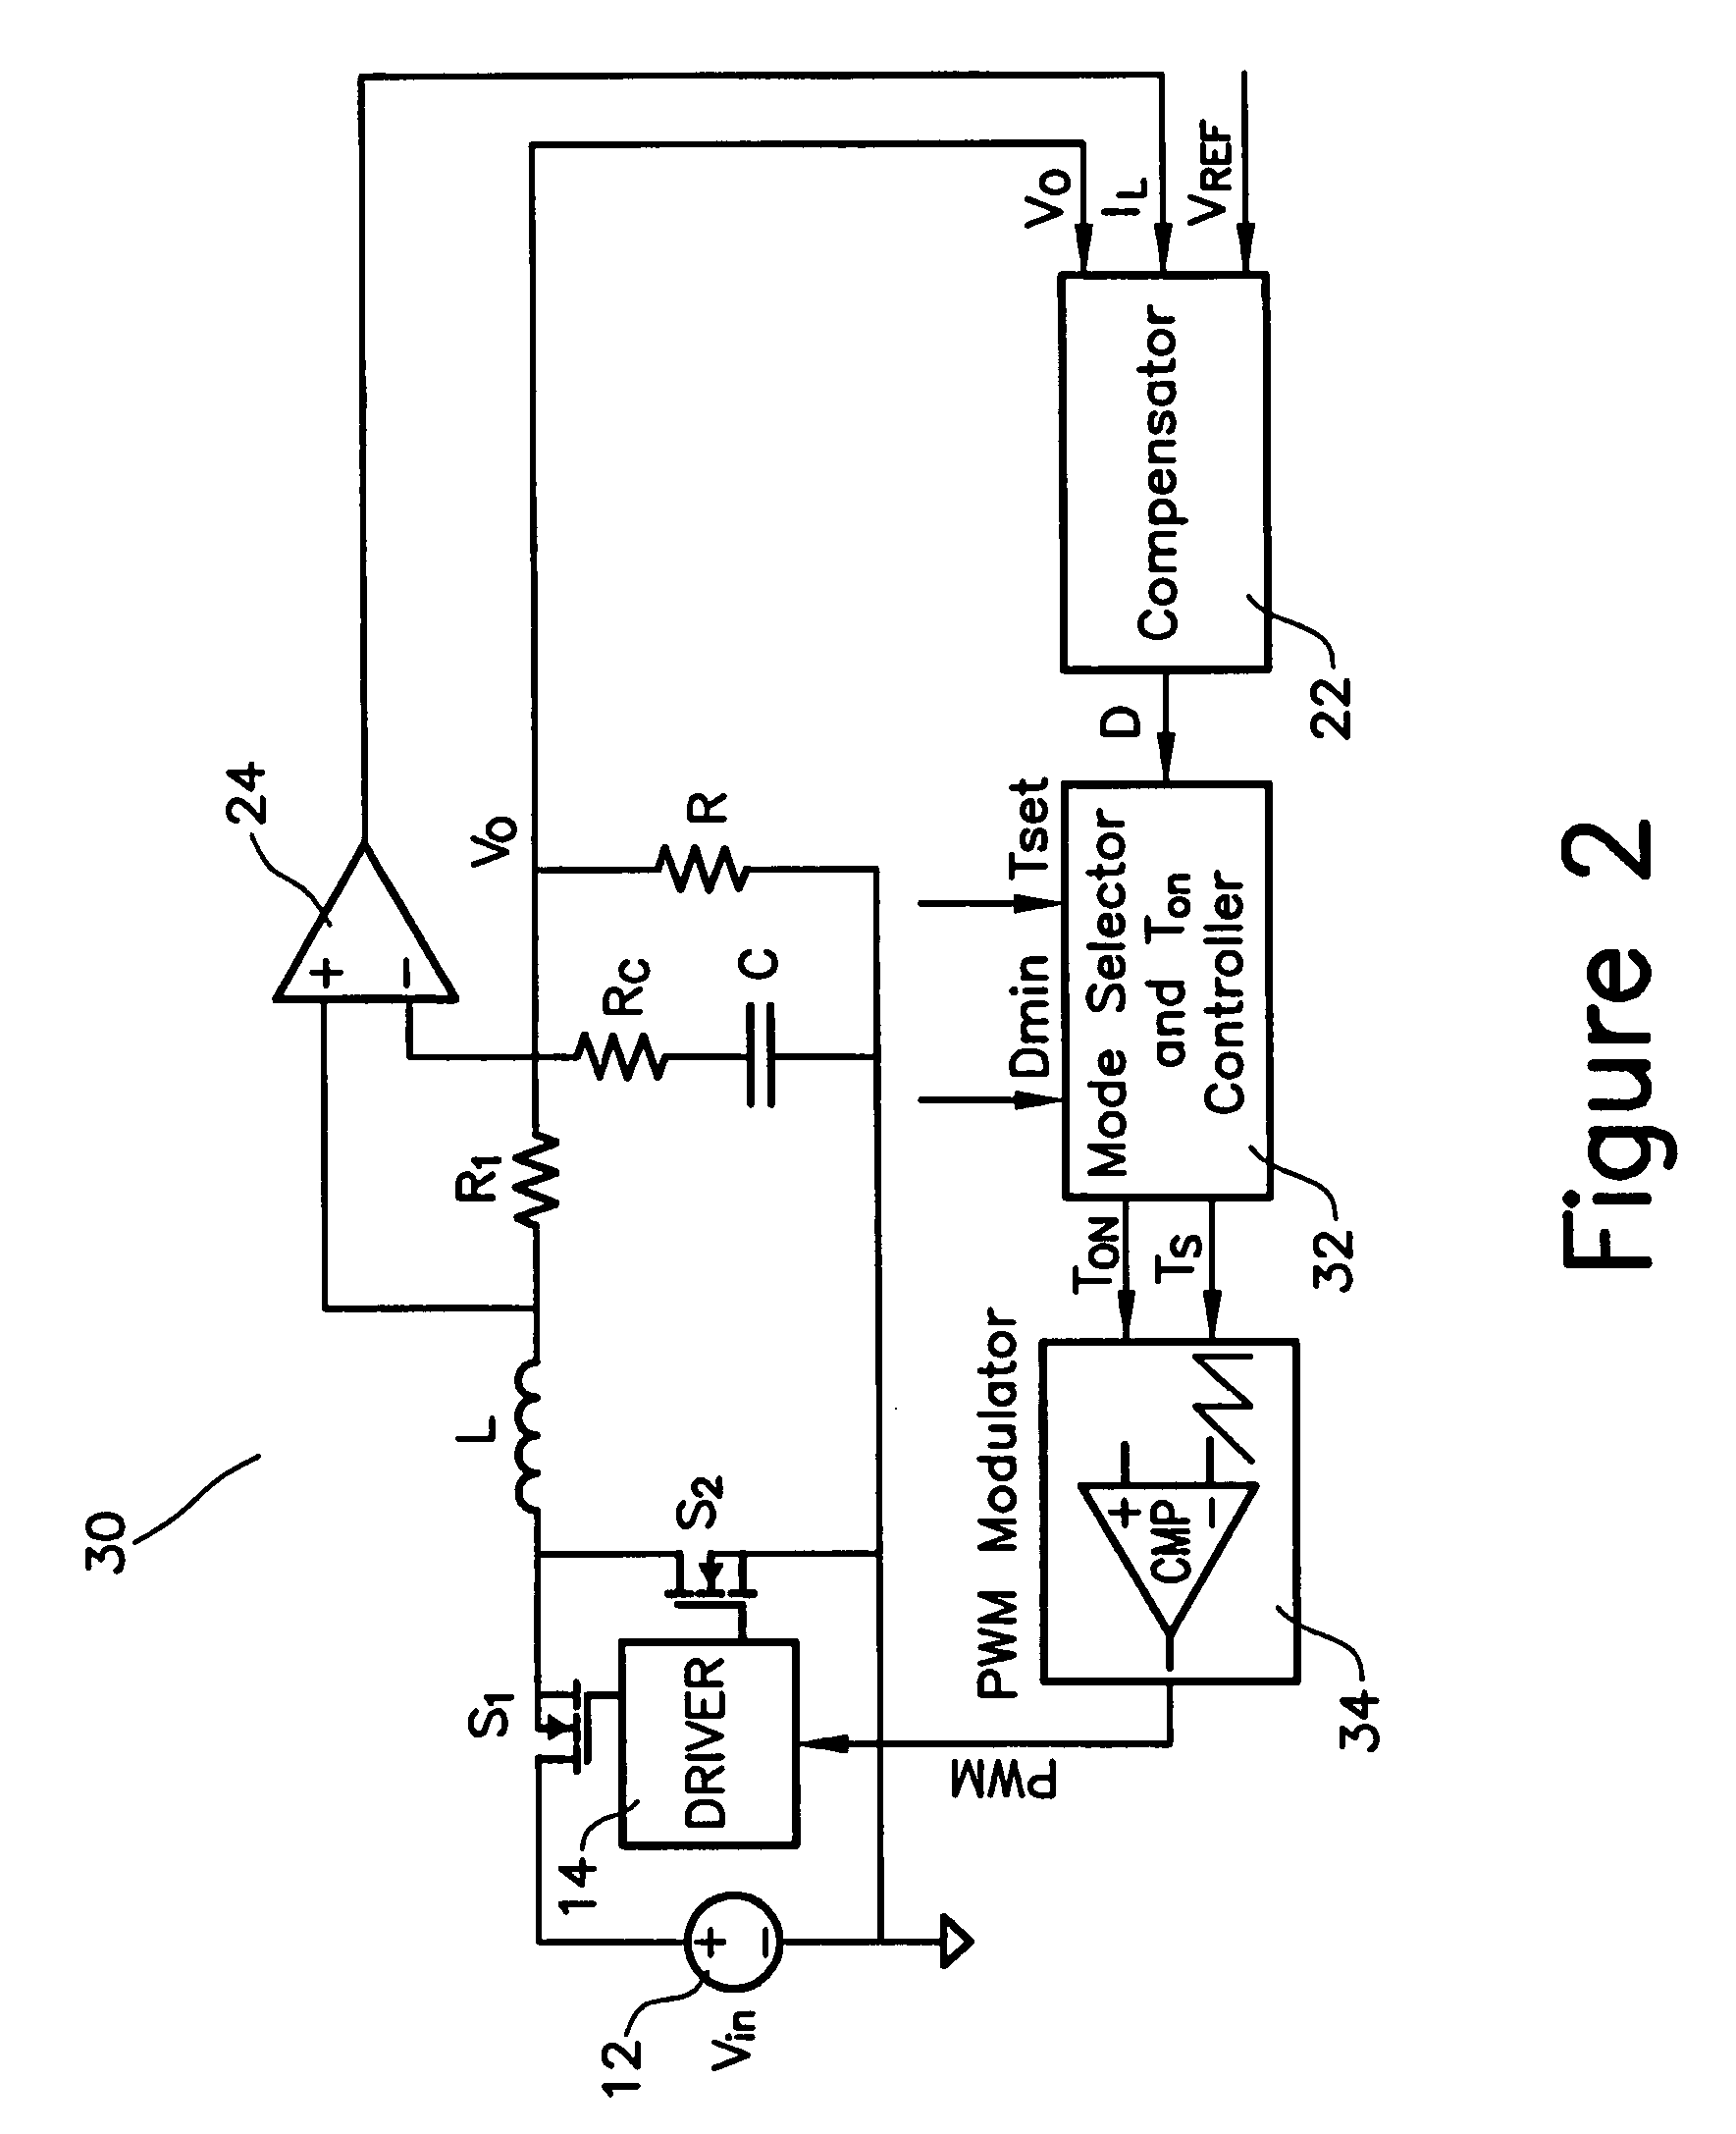 Method and apparatus for improving light load efficiency in switching power supplies